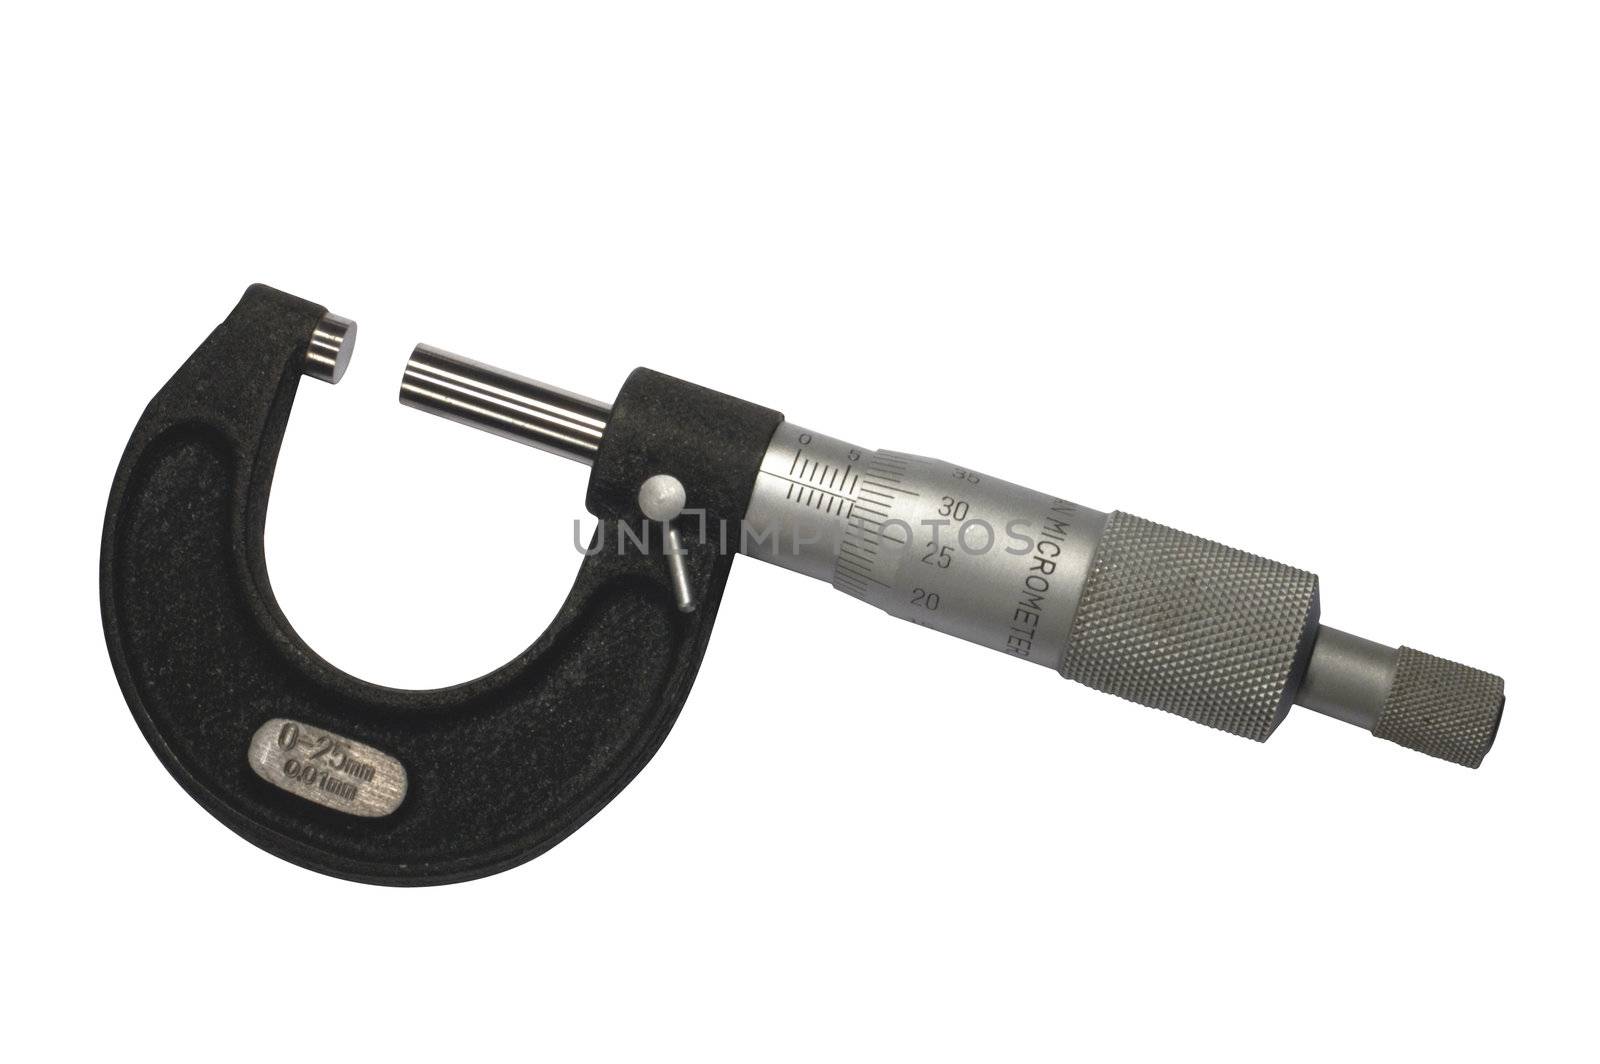 A micrometer. Clipping path included with the file.